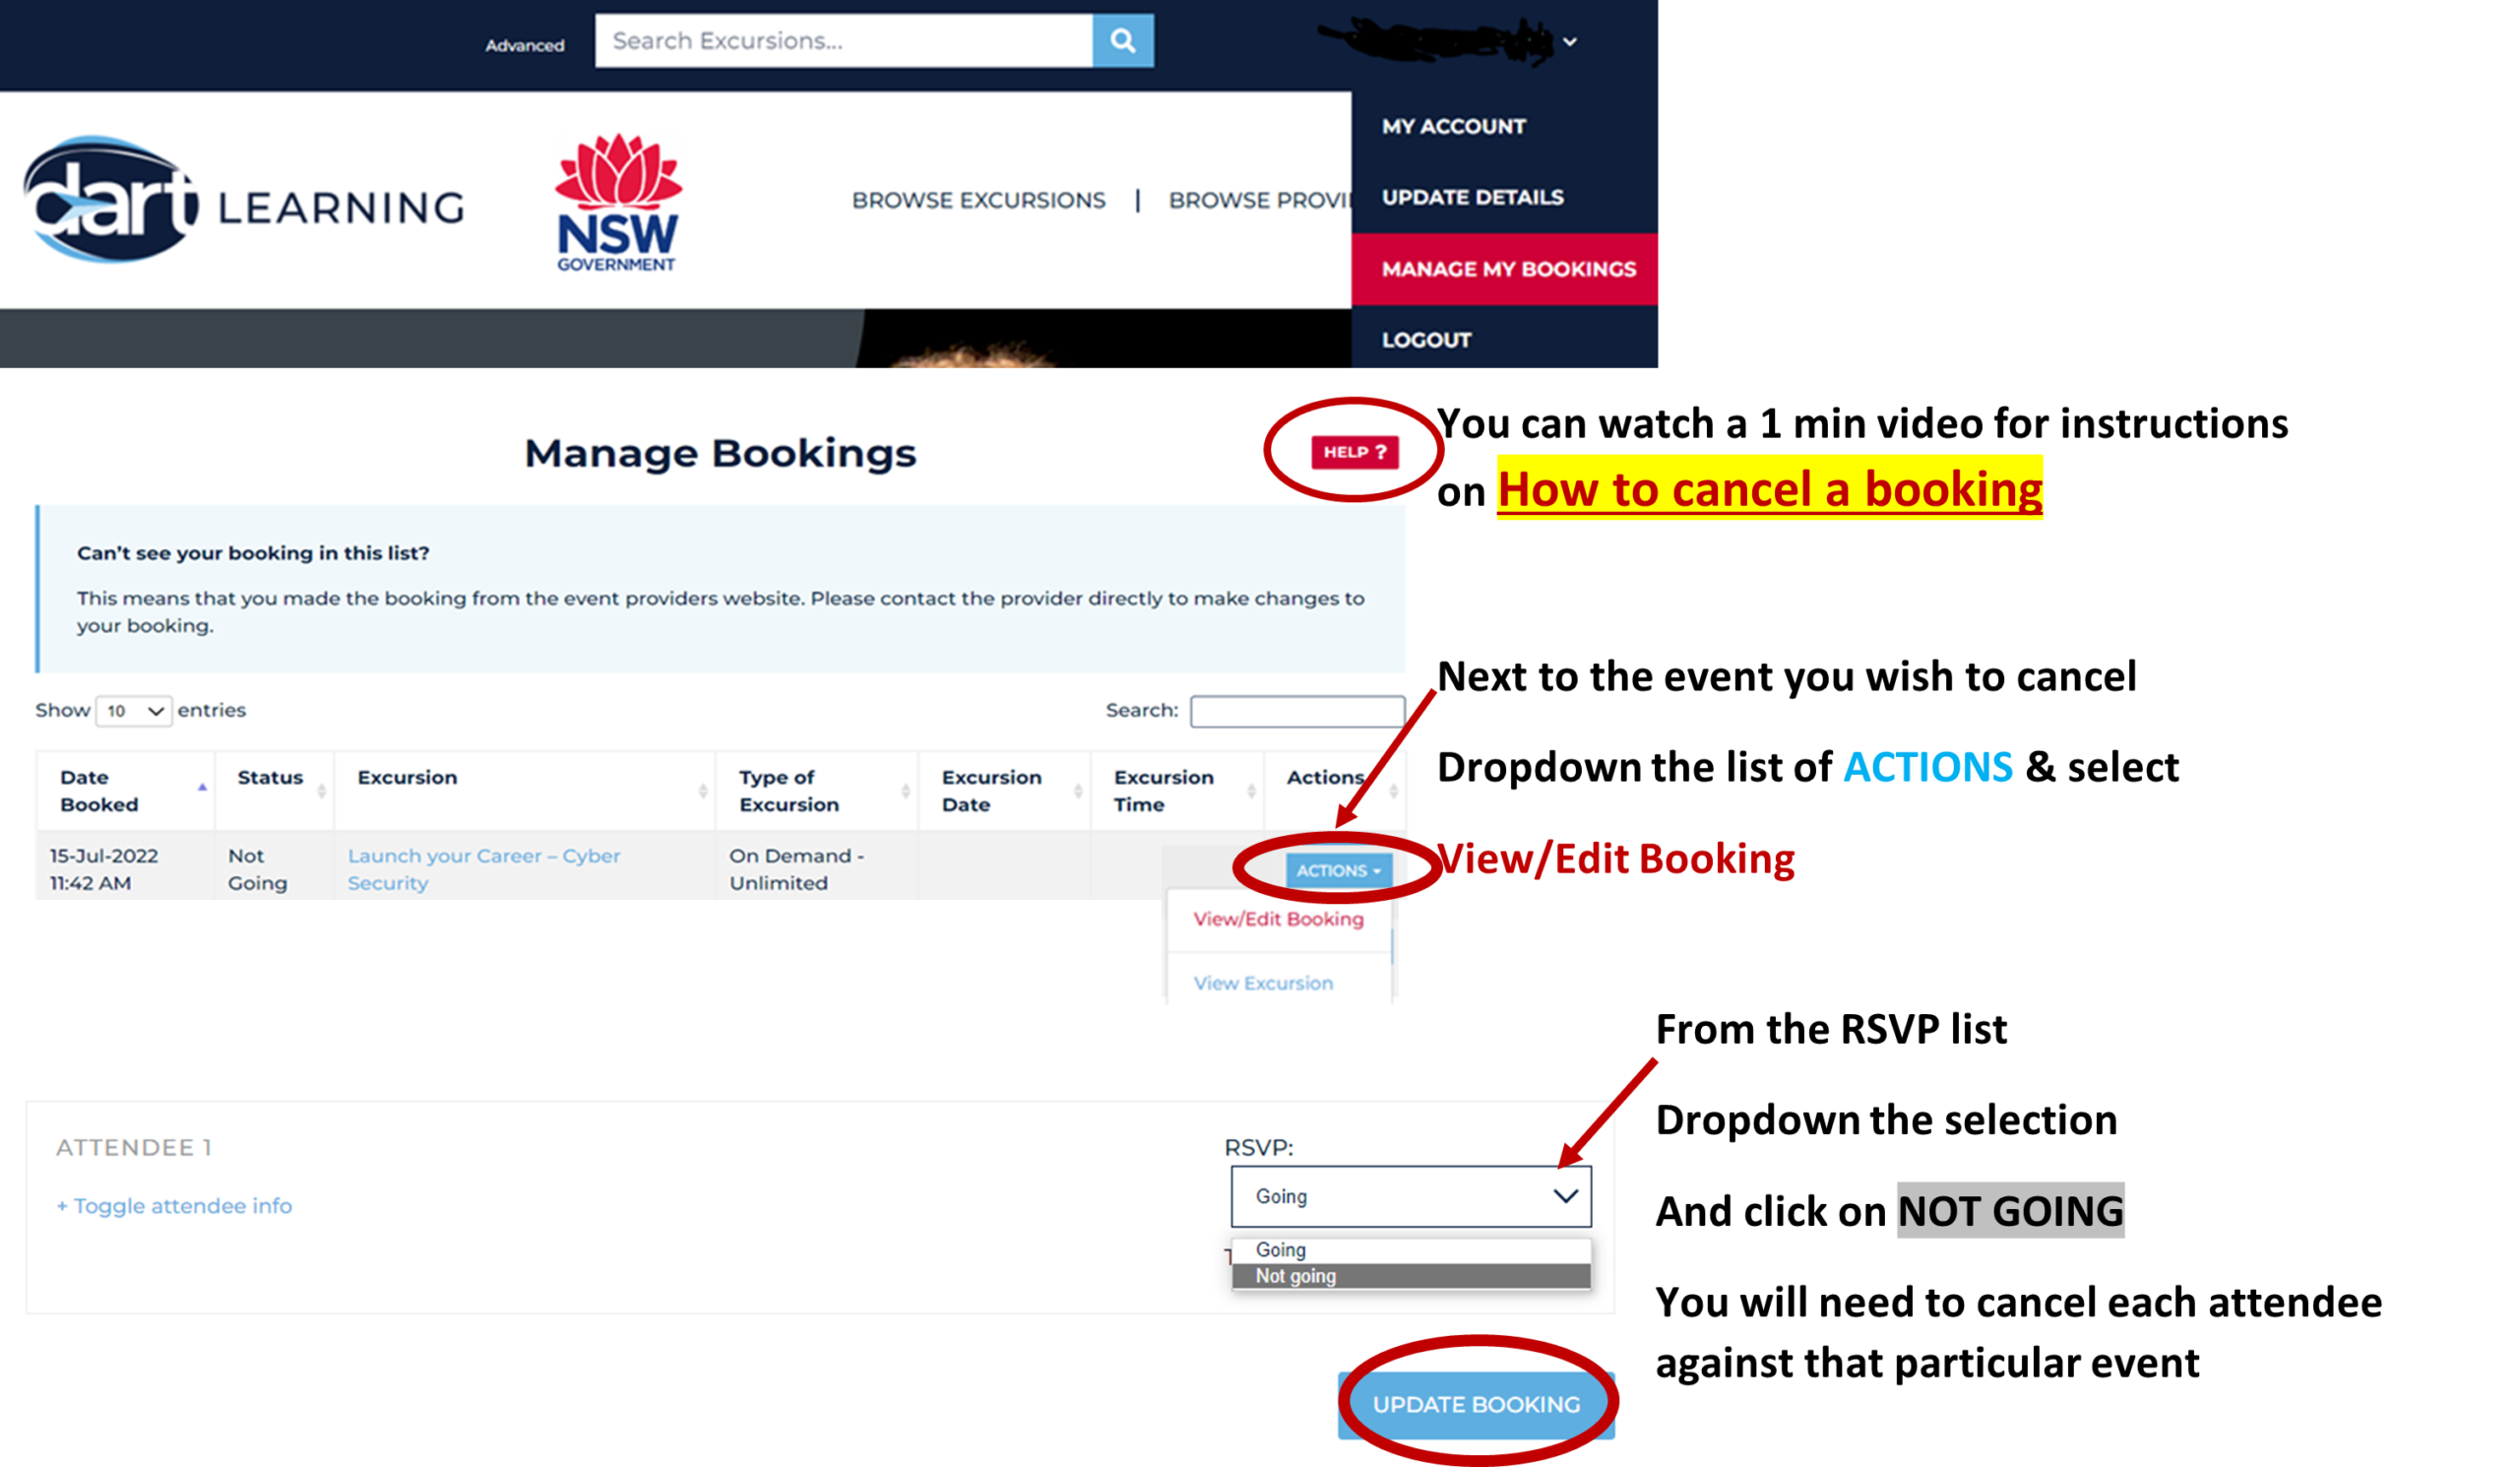 SShot - How to cancel a booking